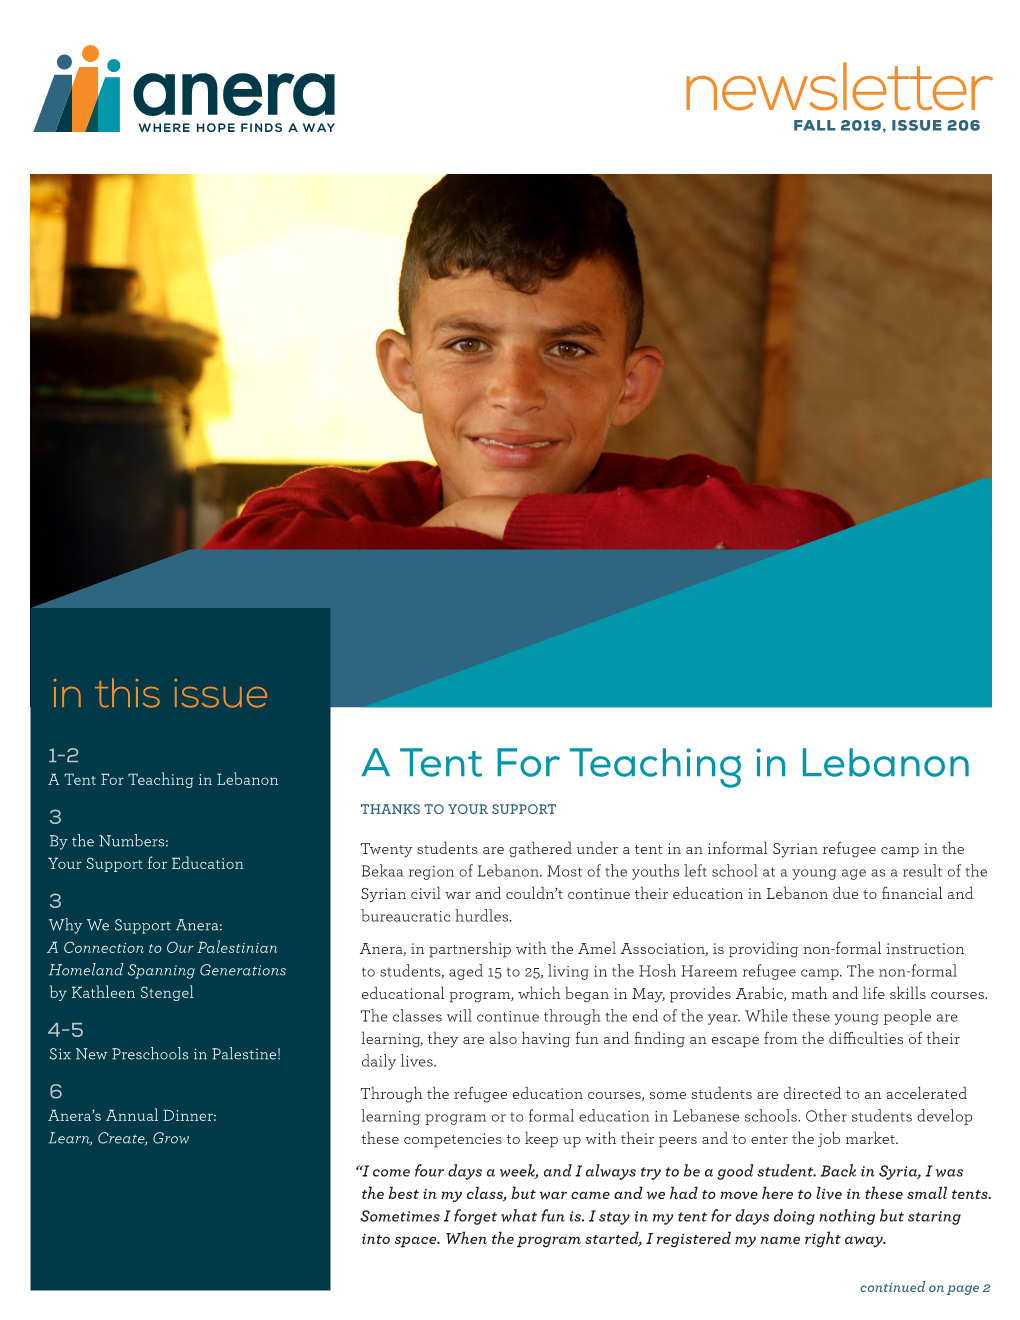 Newsletter FALL 2019, ISSUE 206